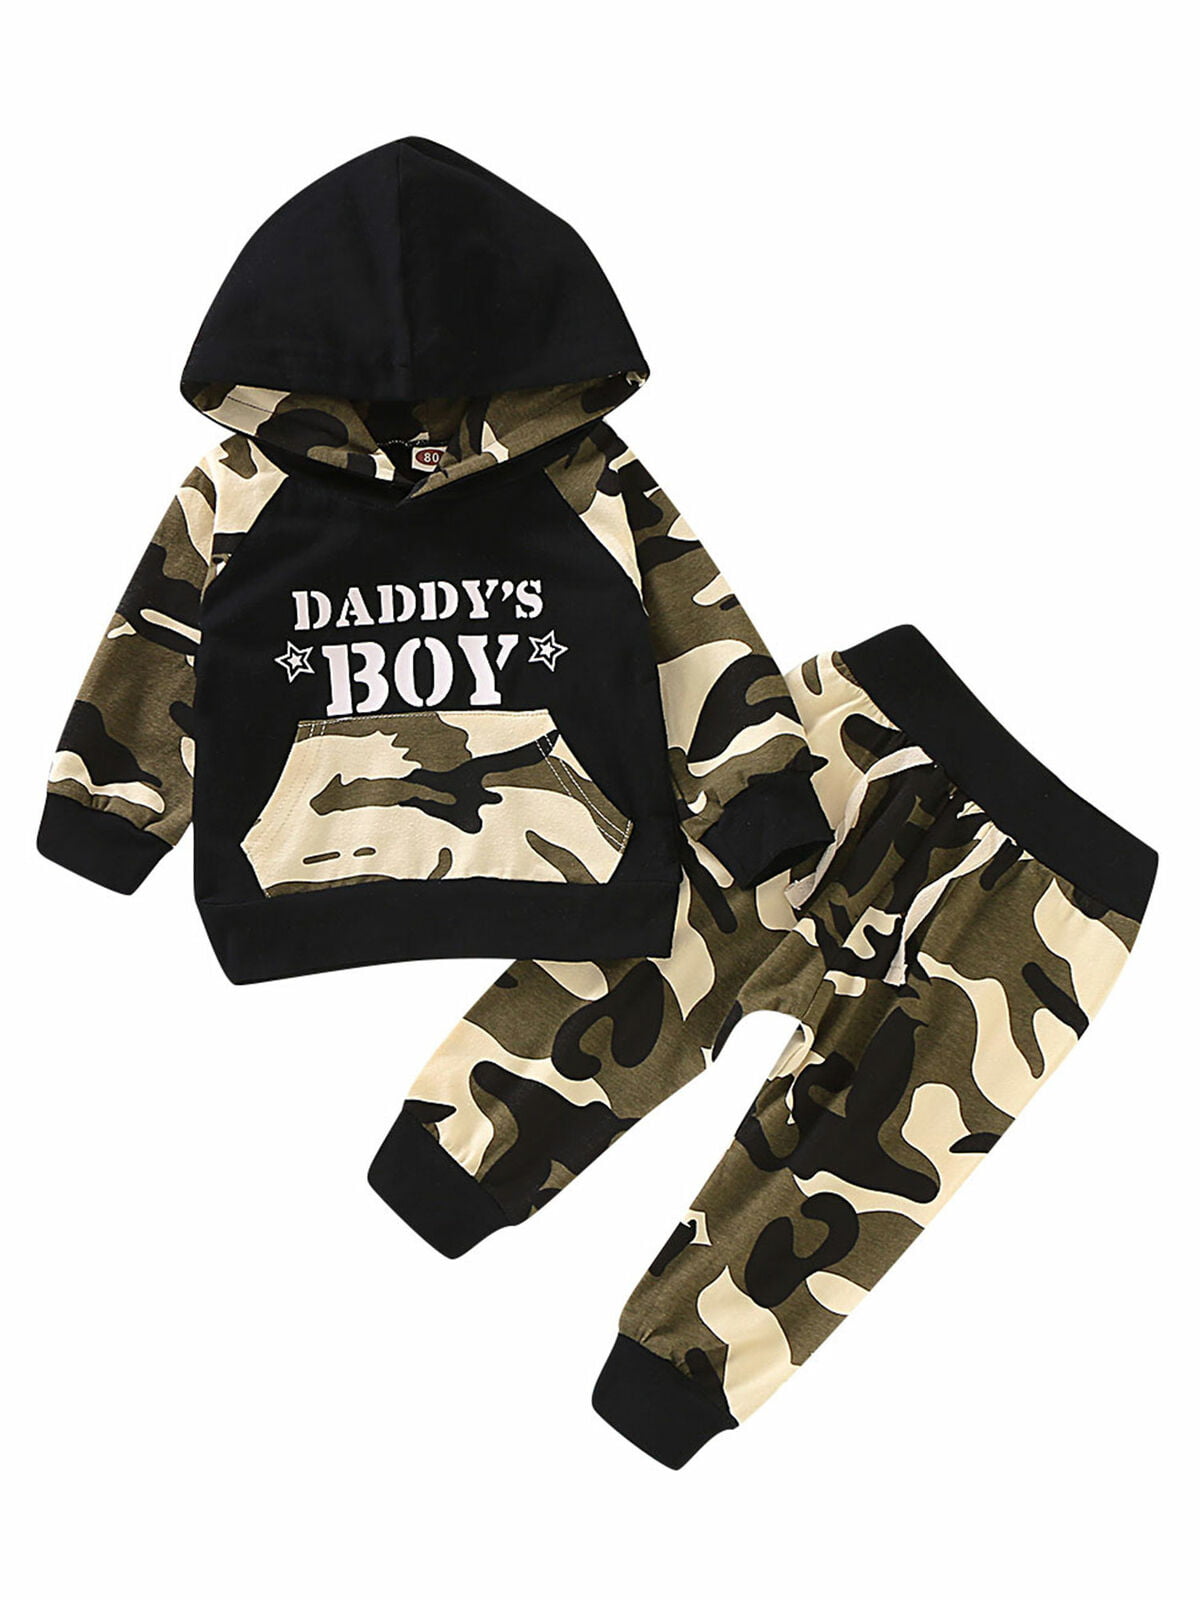 2PCS/set Toddler Kids Baby Boys camouflage Tops &shorts Clothes Outfits Suits 